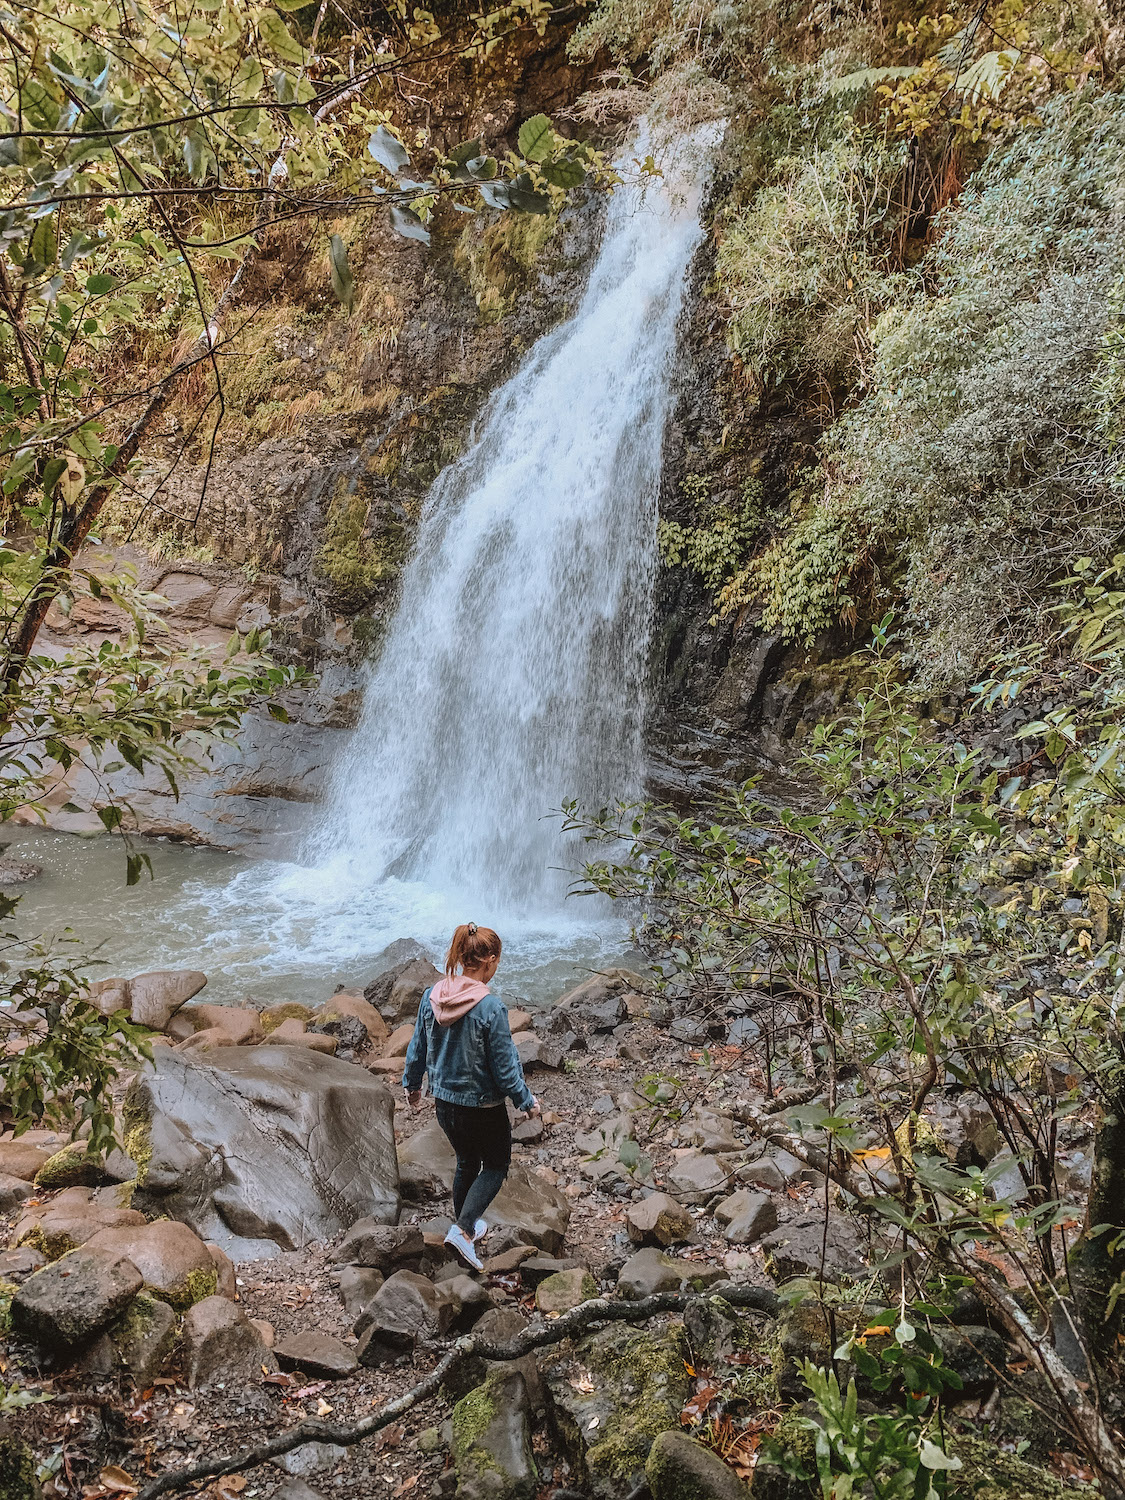 Elyse walking down wet rocks towards a small river. A heavy flowing waterfall is rushing into the river. This was taken in her first month of the year recap